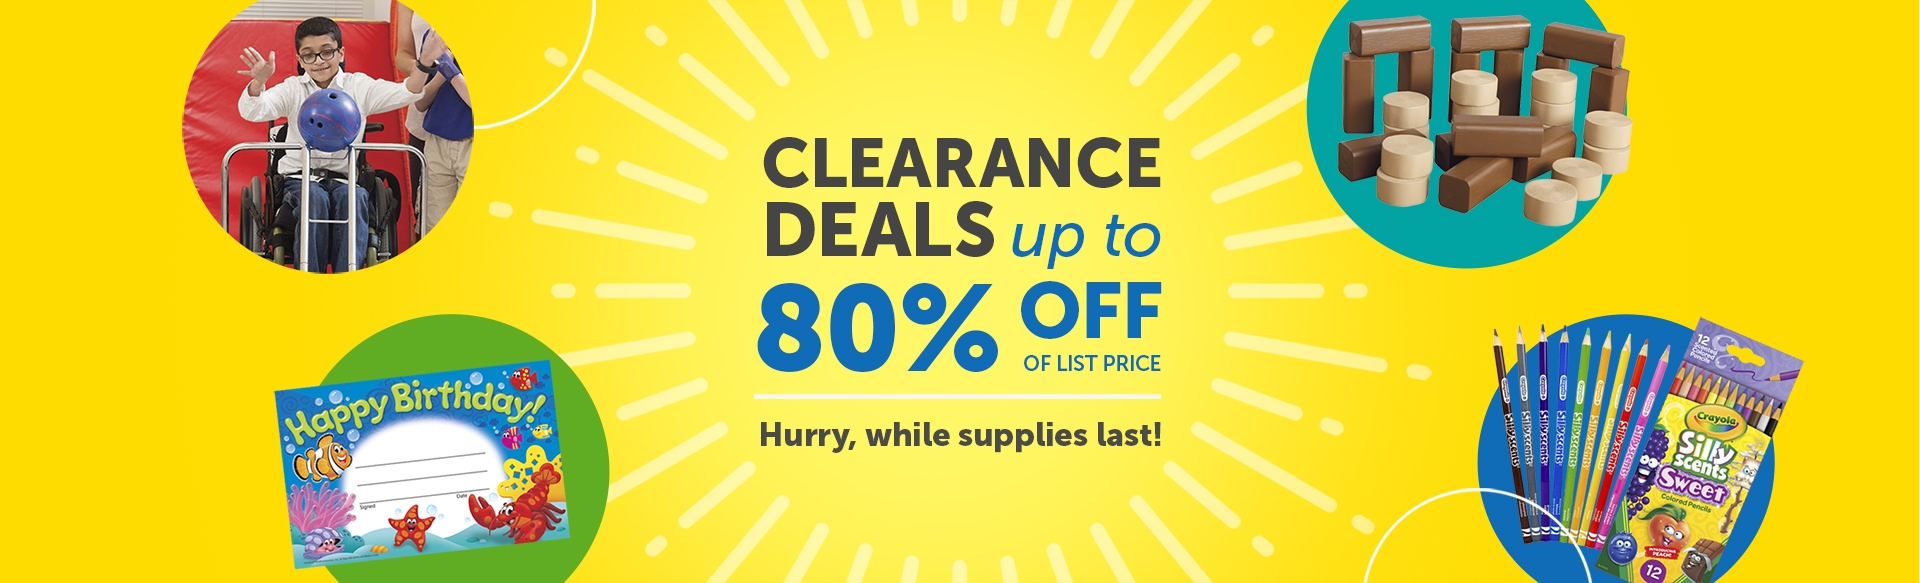 clearance deals save up to 80% off of list price